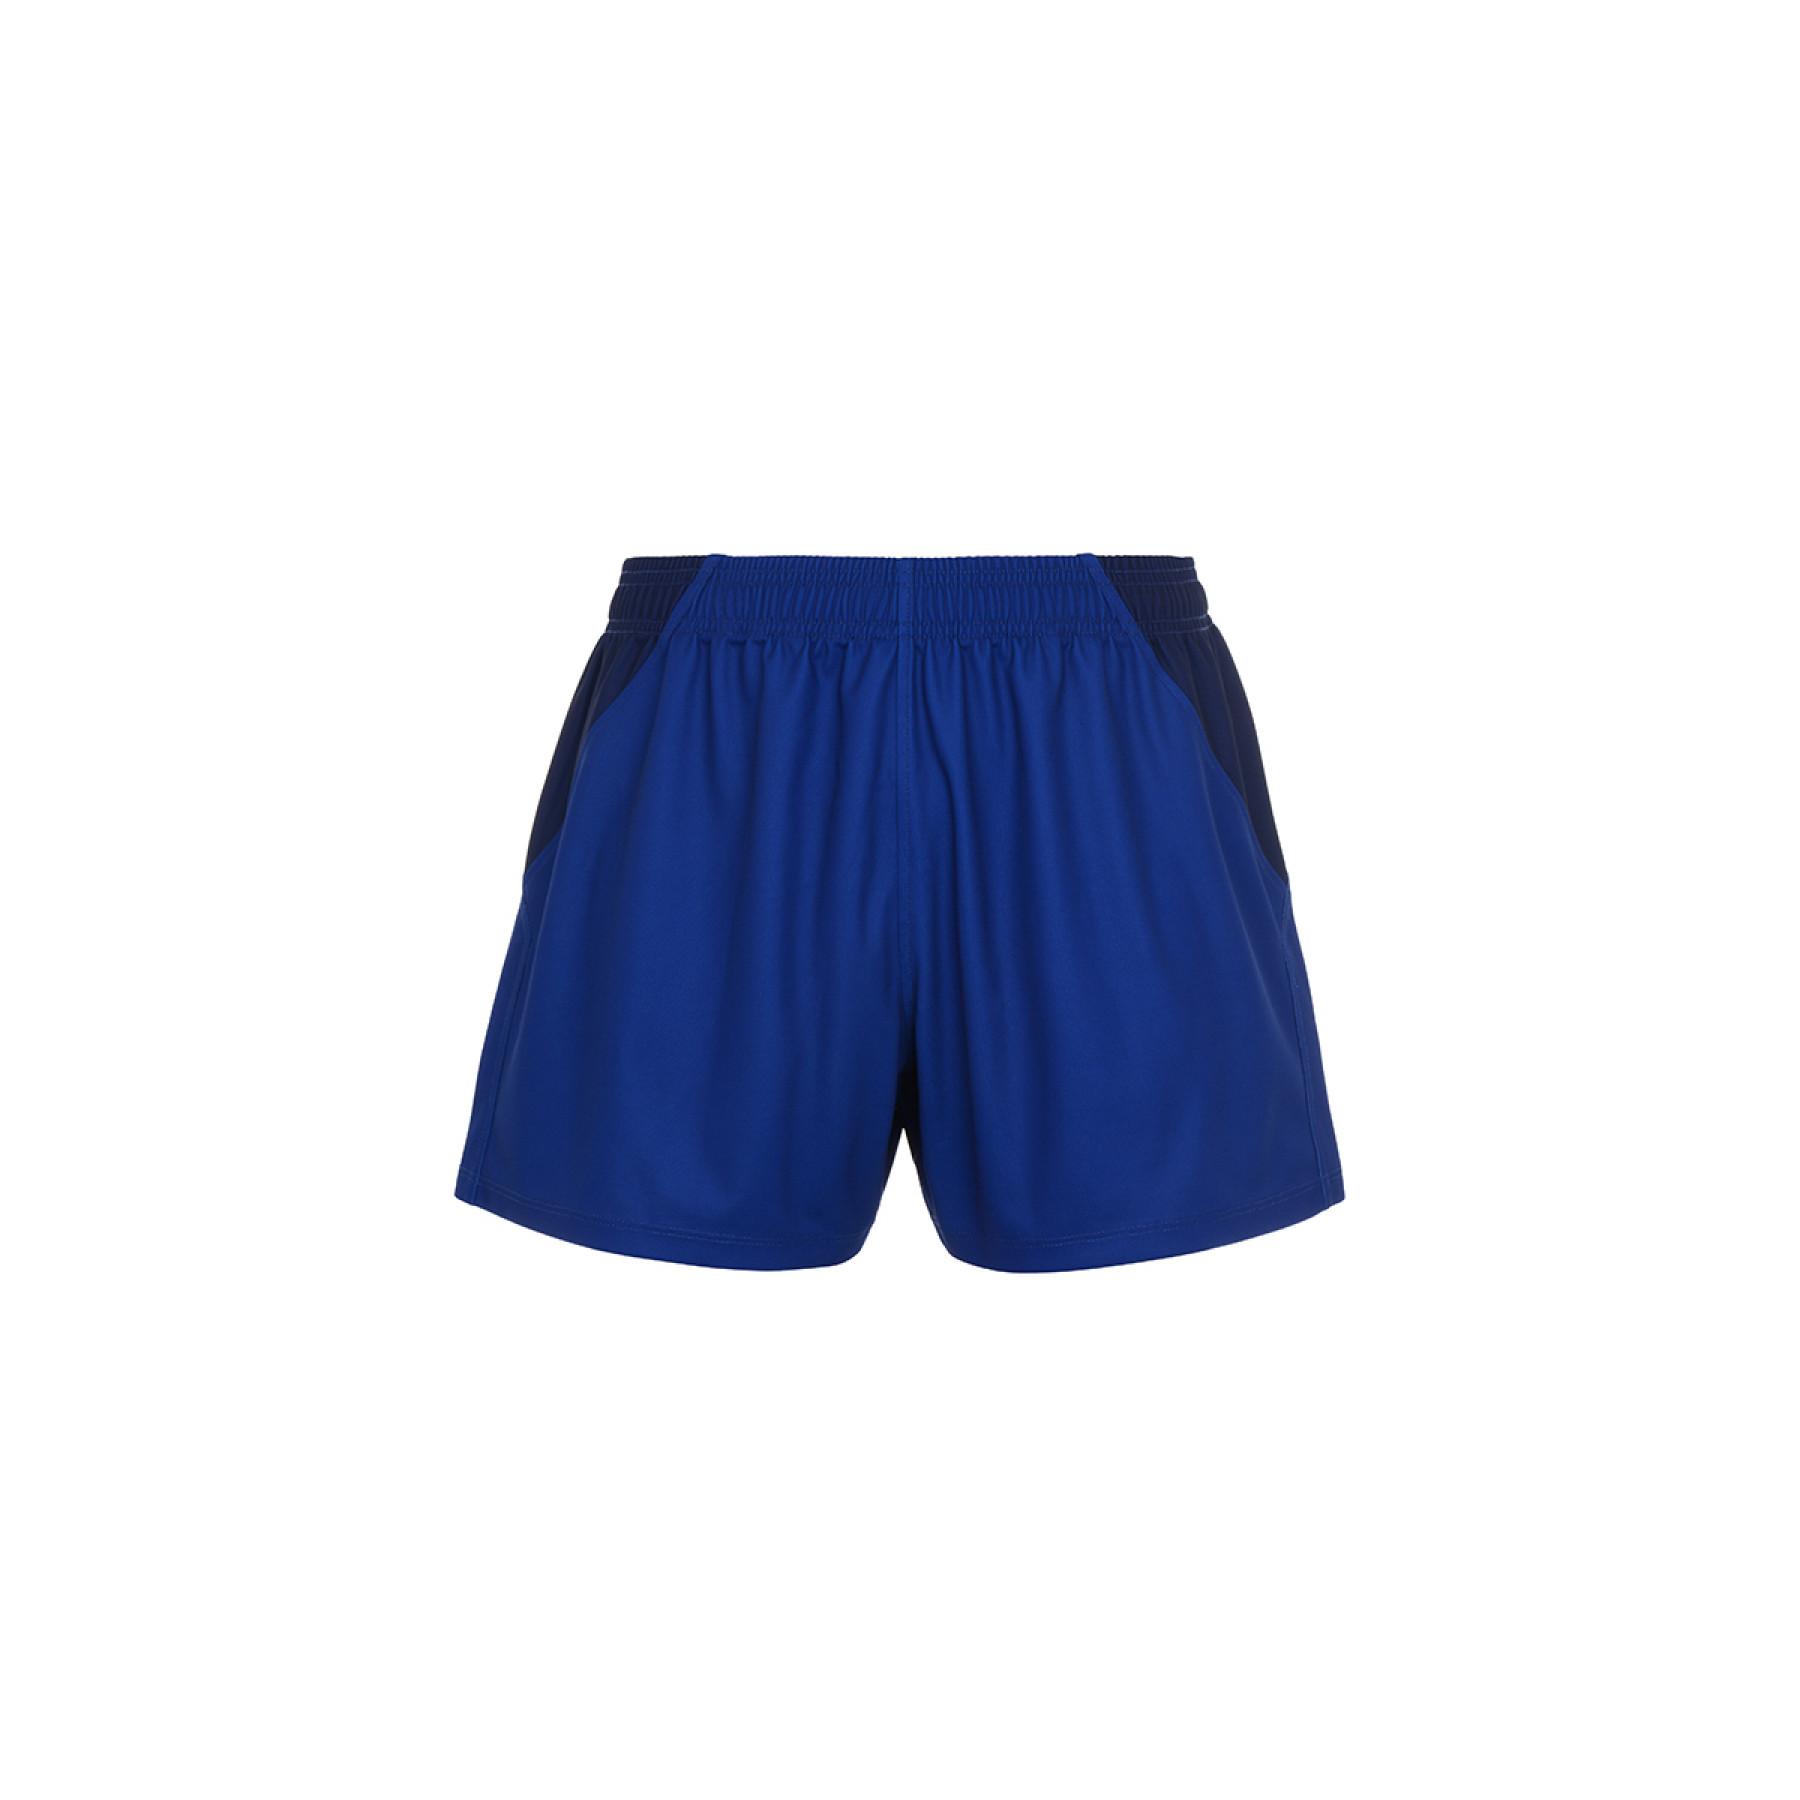 Home shorts FC Grenoble Rugby 2020/21